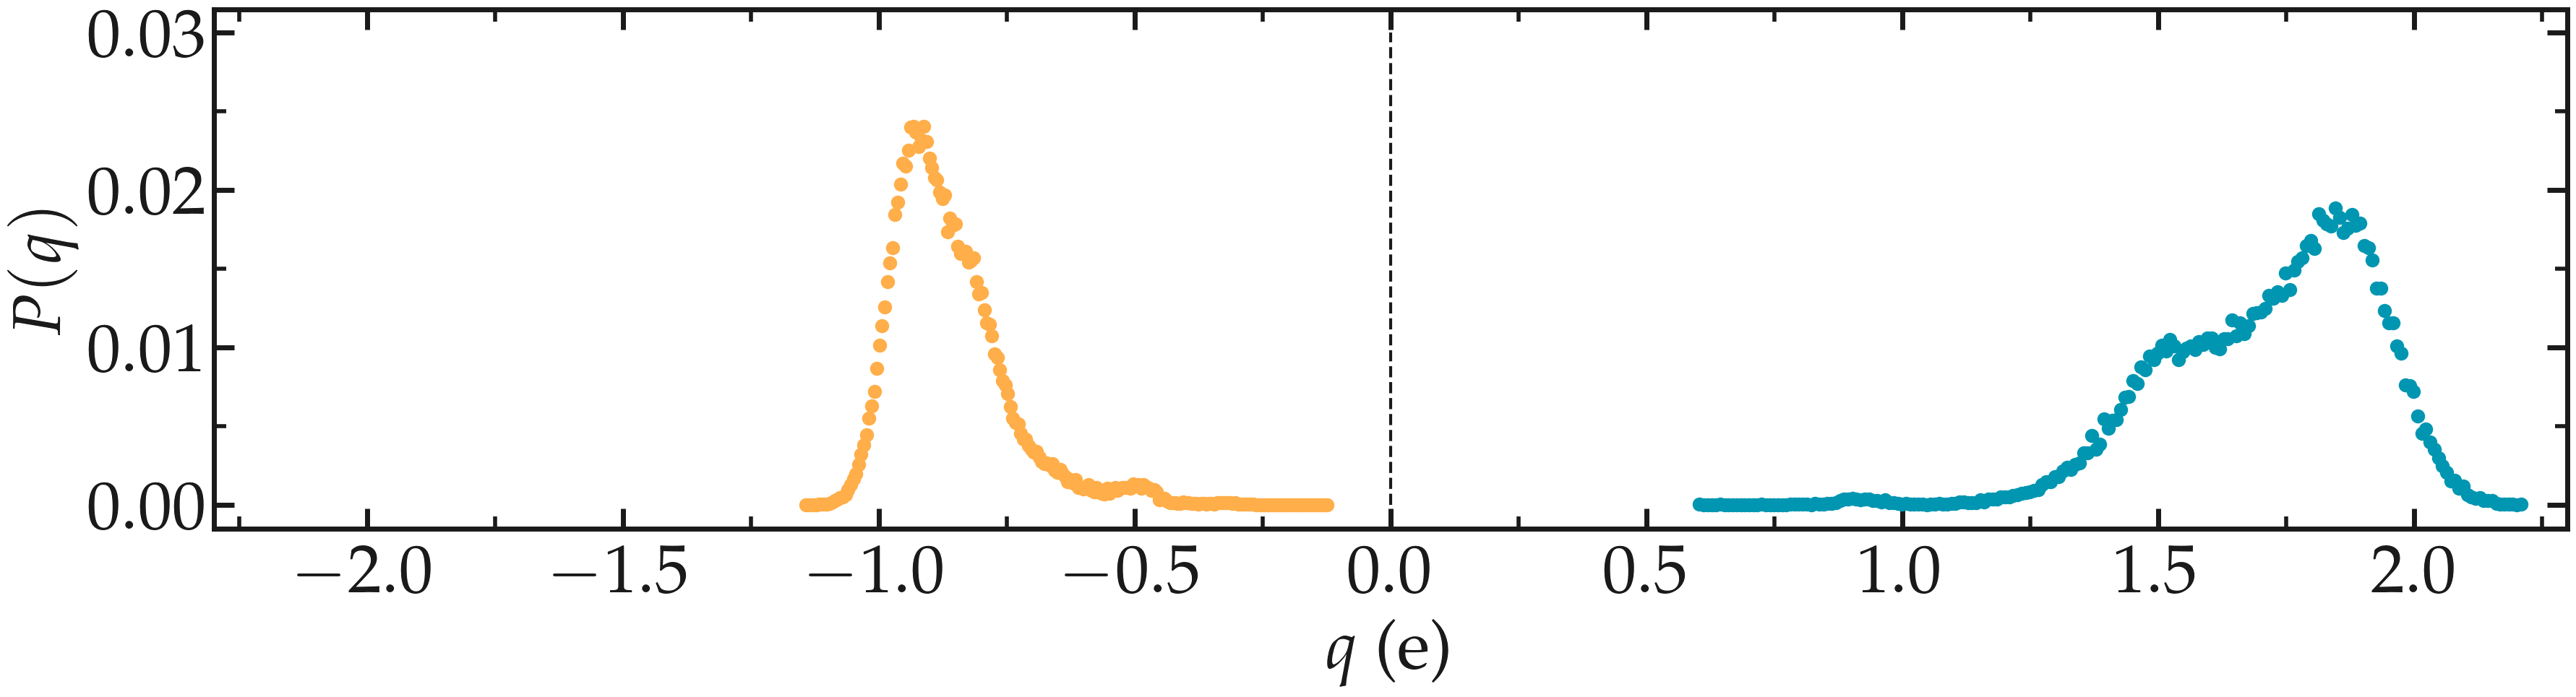 Distribution charge of silica and oxygen during equilibration with reaxff